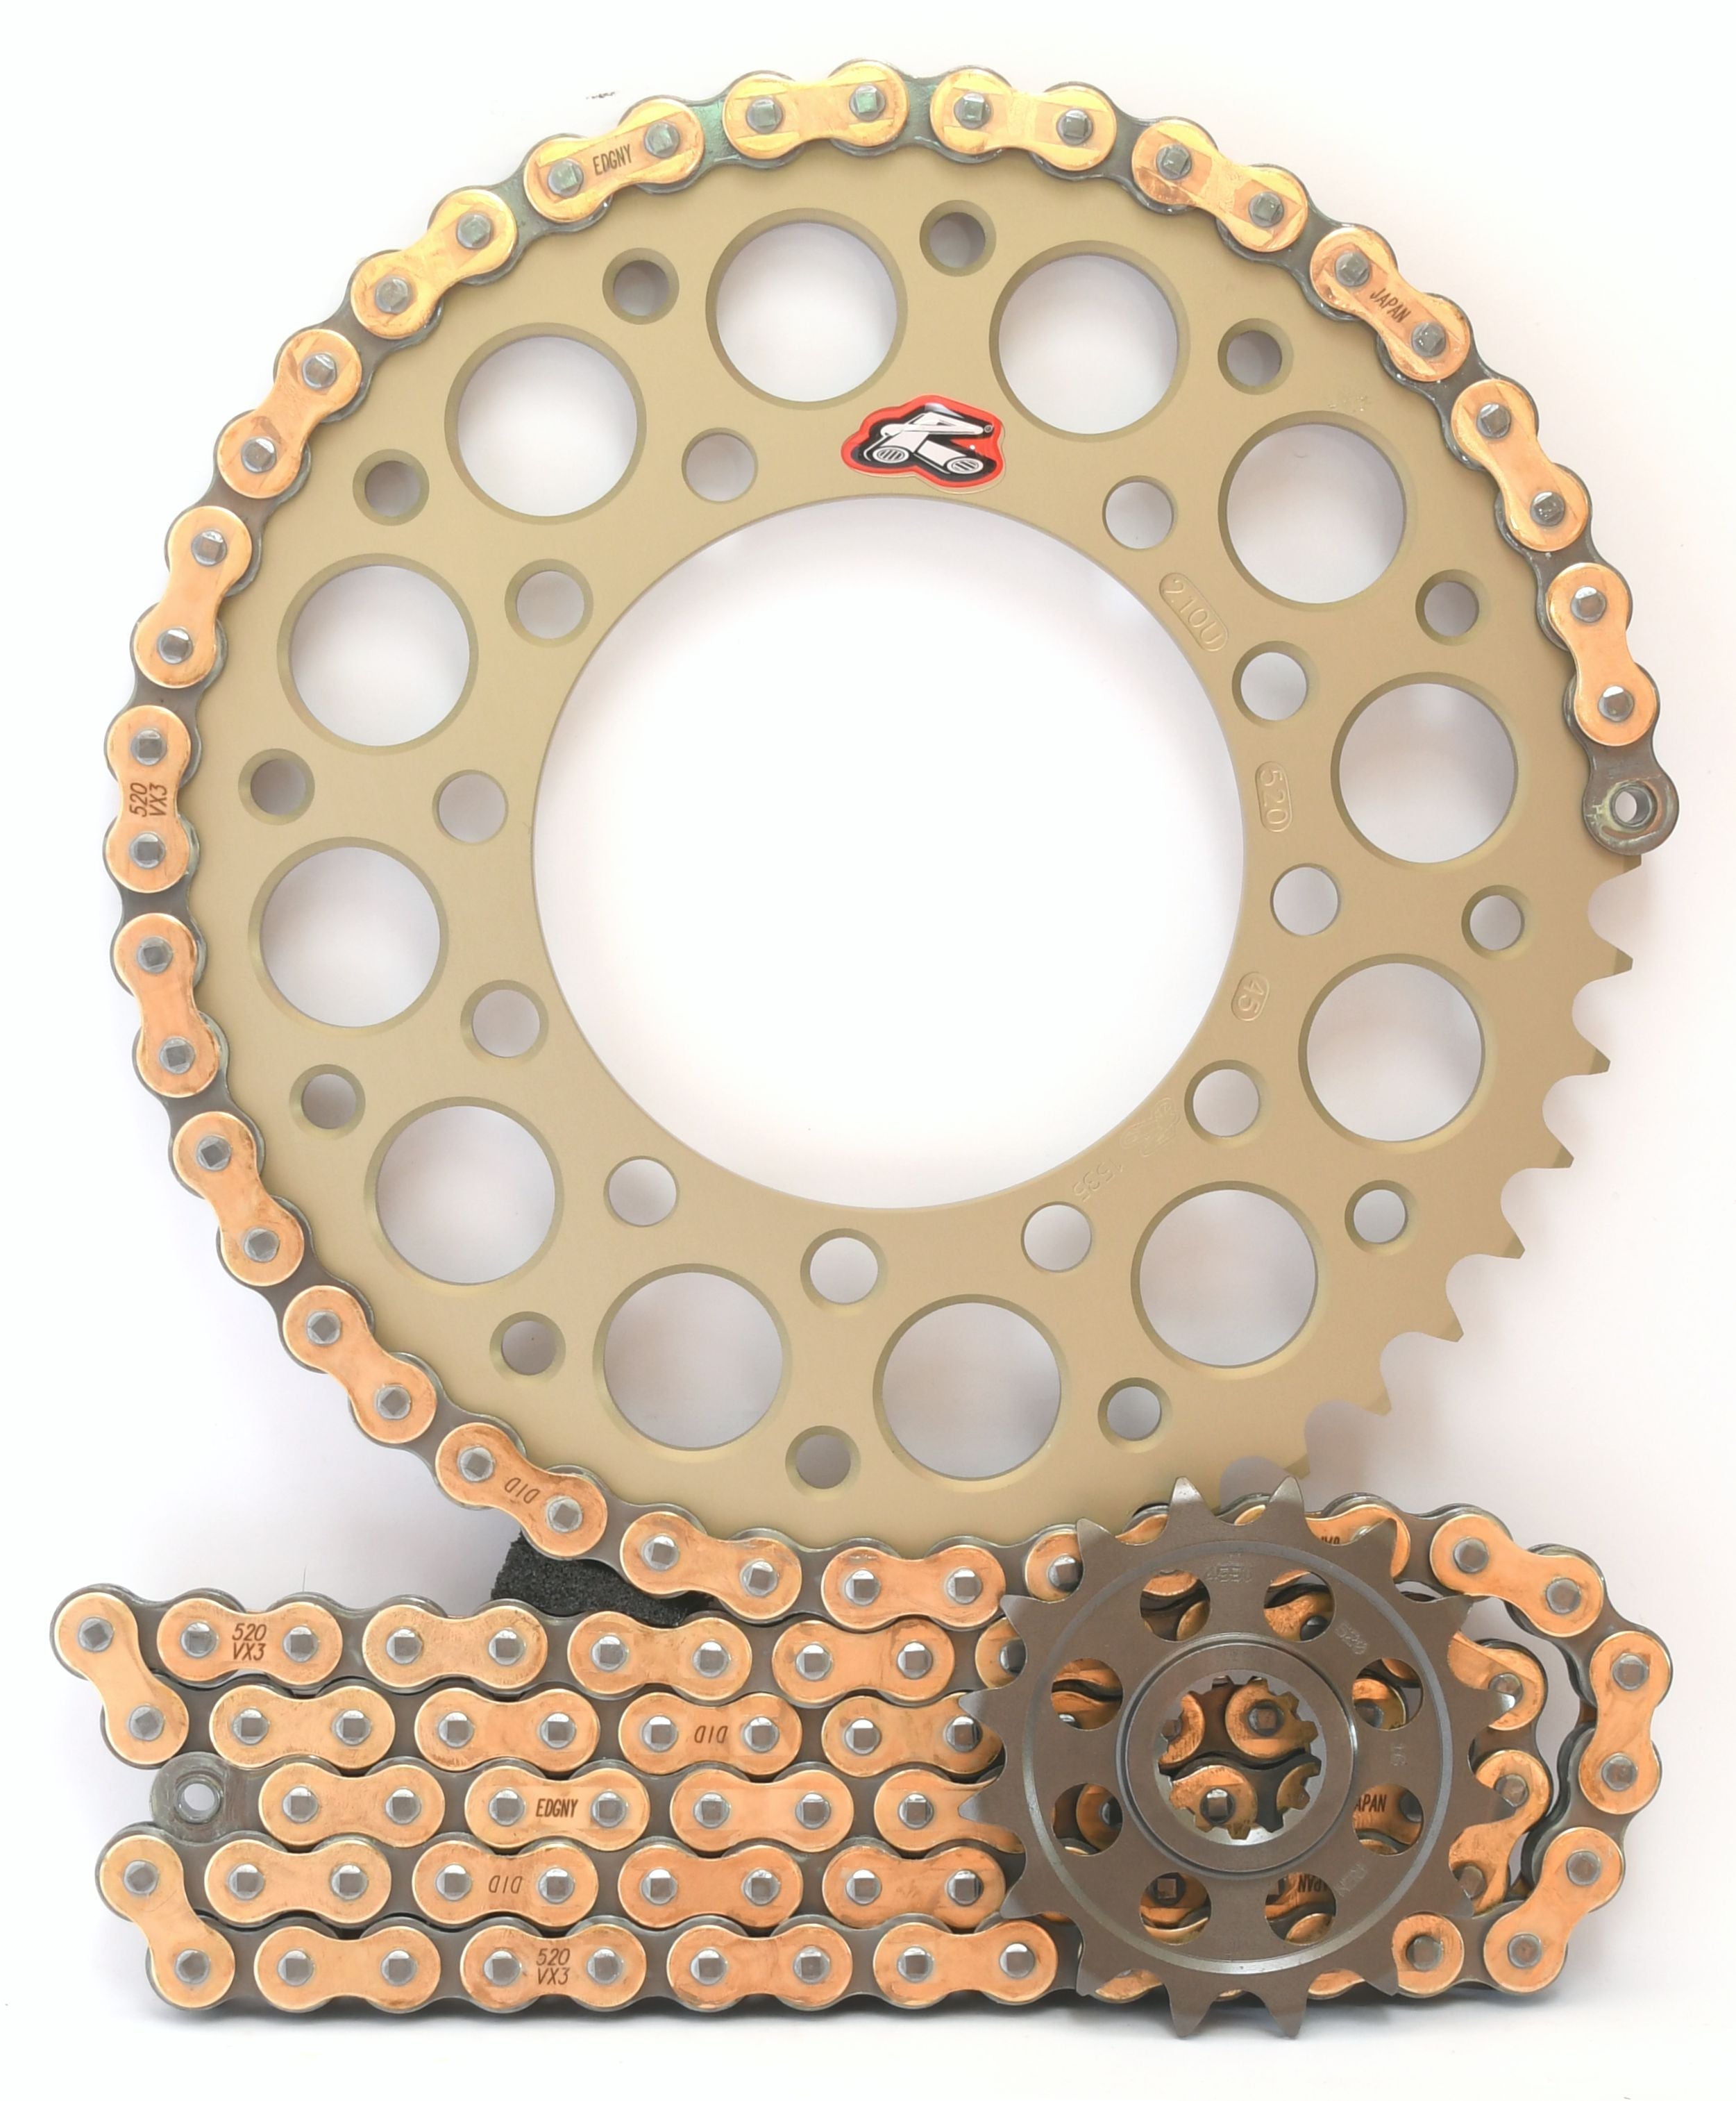 Renthal Ultralight DID Chain & Sprocket Kit 520 Conversion for Suzuki GSX-R750 2000-2010 - Choose Your Gearing